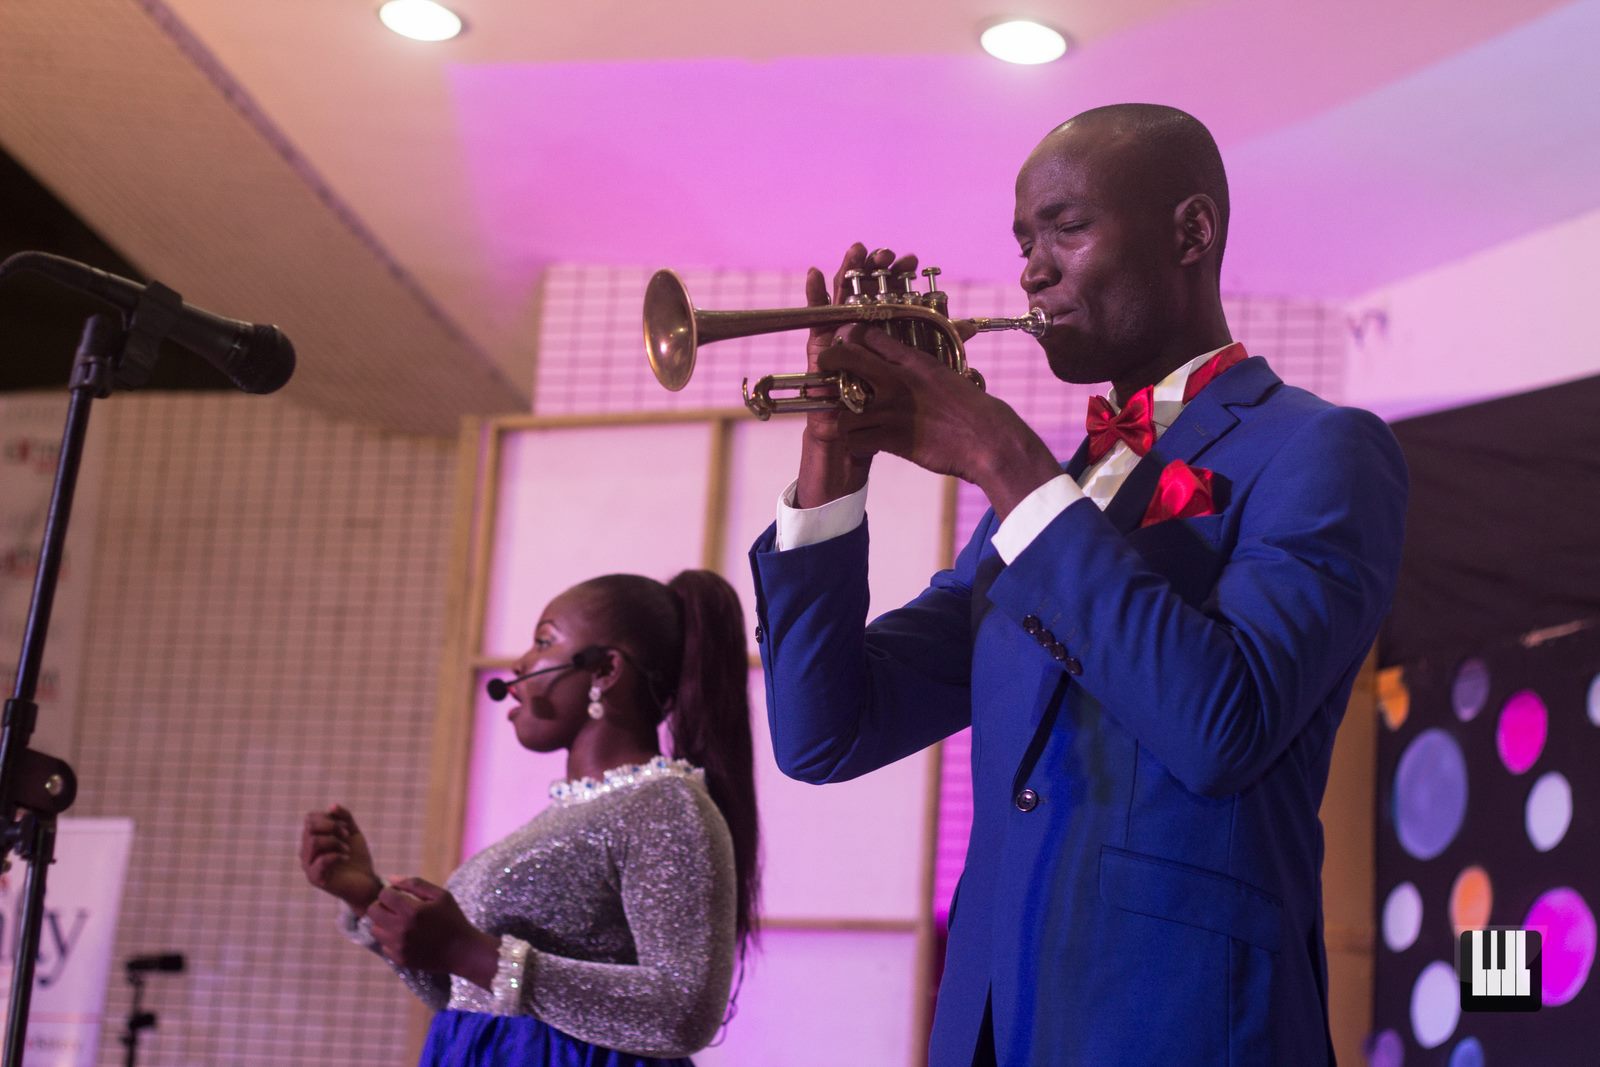 Ghana's Ace Trumpeter: Patrick Agbodza-Gbekle Choral Music Ghana's Kwaku Boakye-Frempong spoke to Patrick, the famous trumpeter of Harmonious Chorale and the Ghana National Symphony Orchestra about his life as a classical brass musician in Ghana.